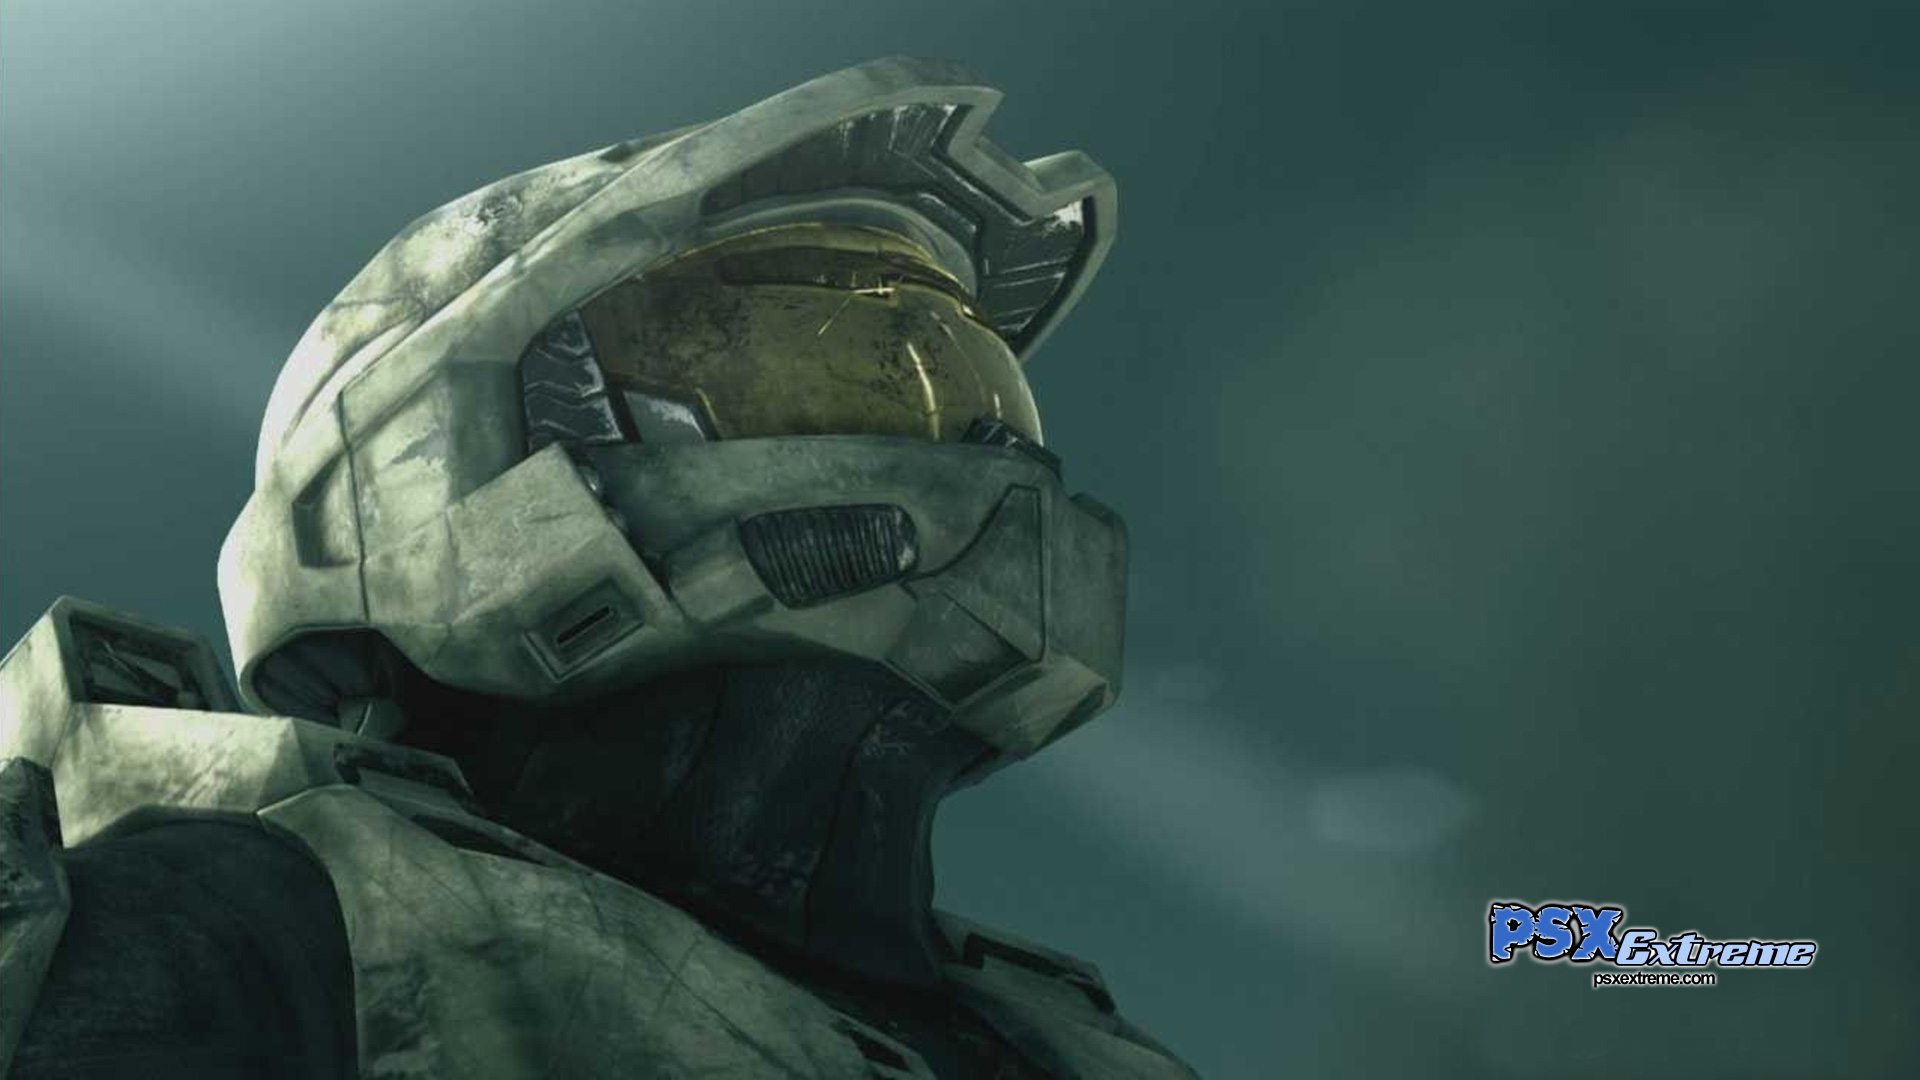 Wallpaper Ps3 Background Puter Halo3 Halo